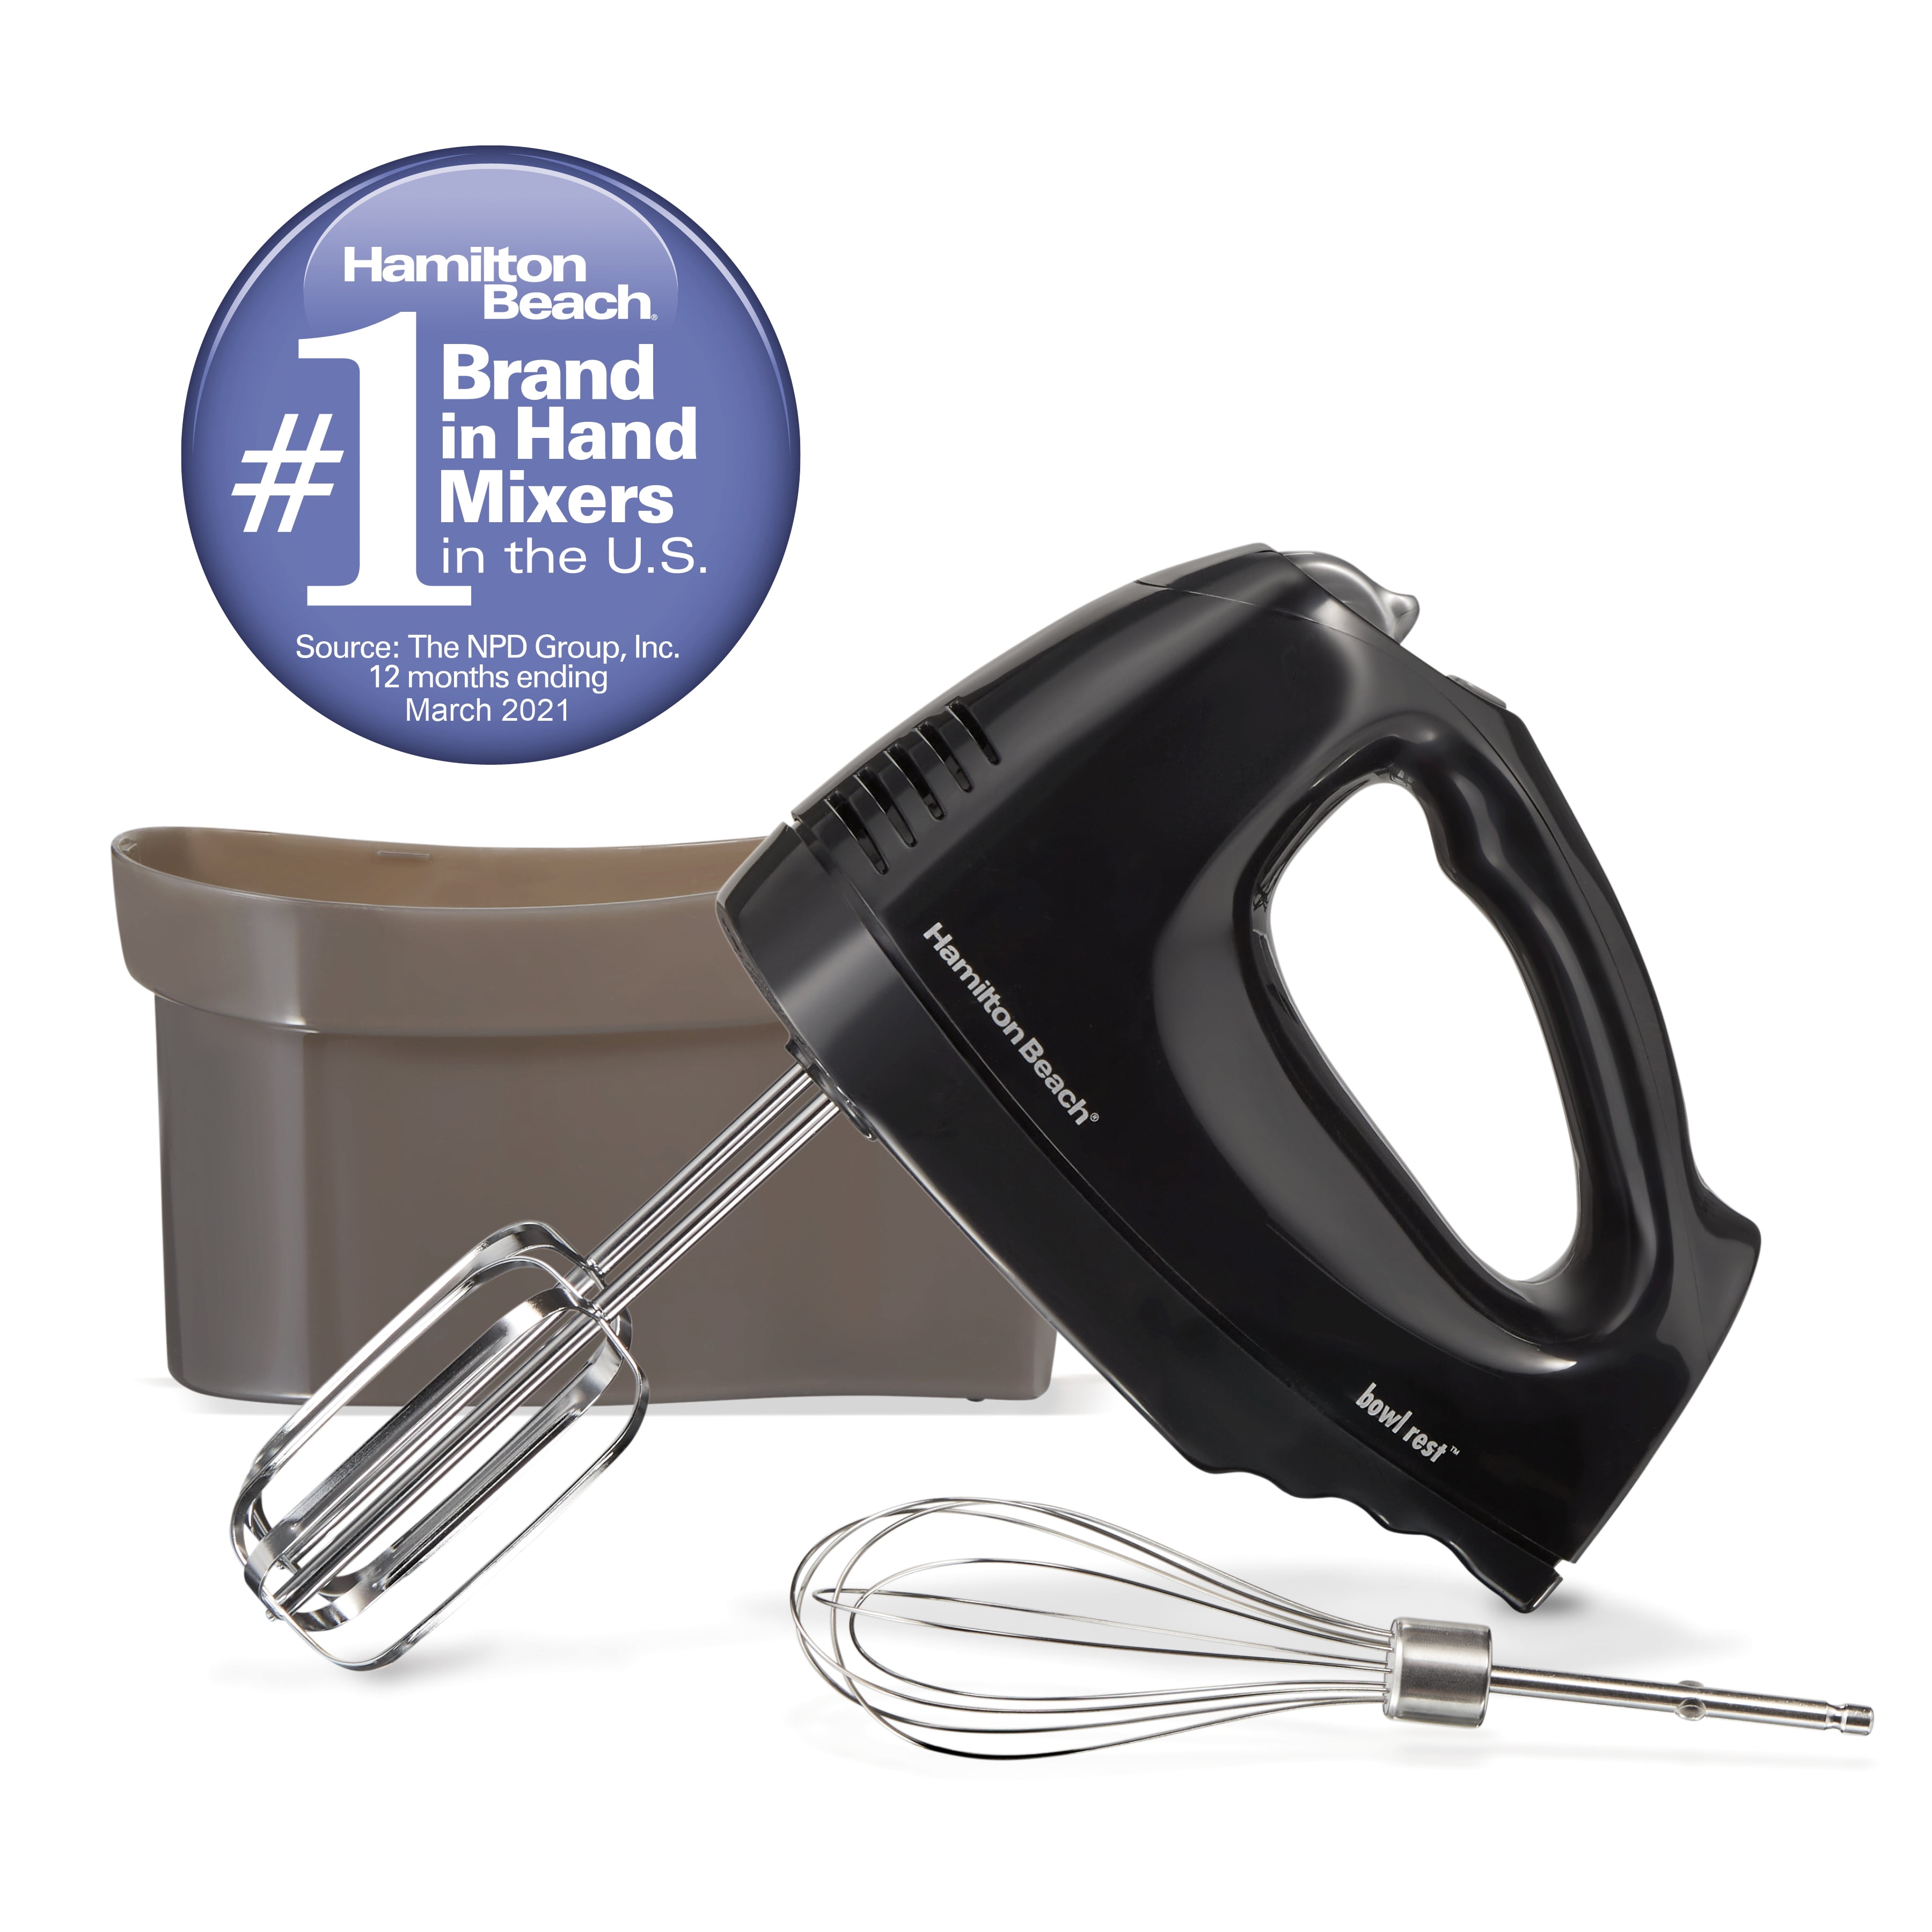 Hamilton Beach 6 Speed Electric Hand Mixer with Snap-On Case, 3